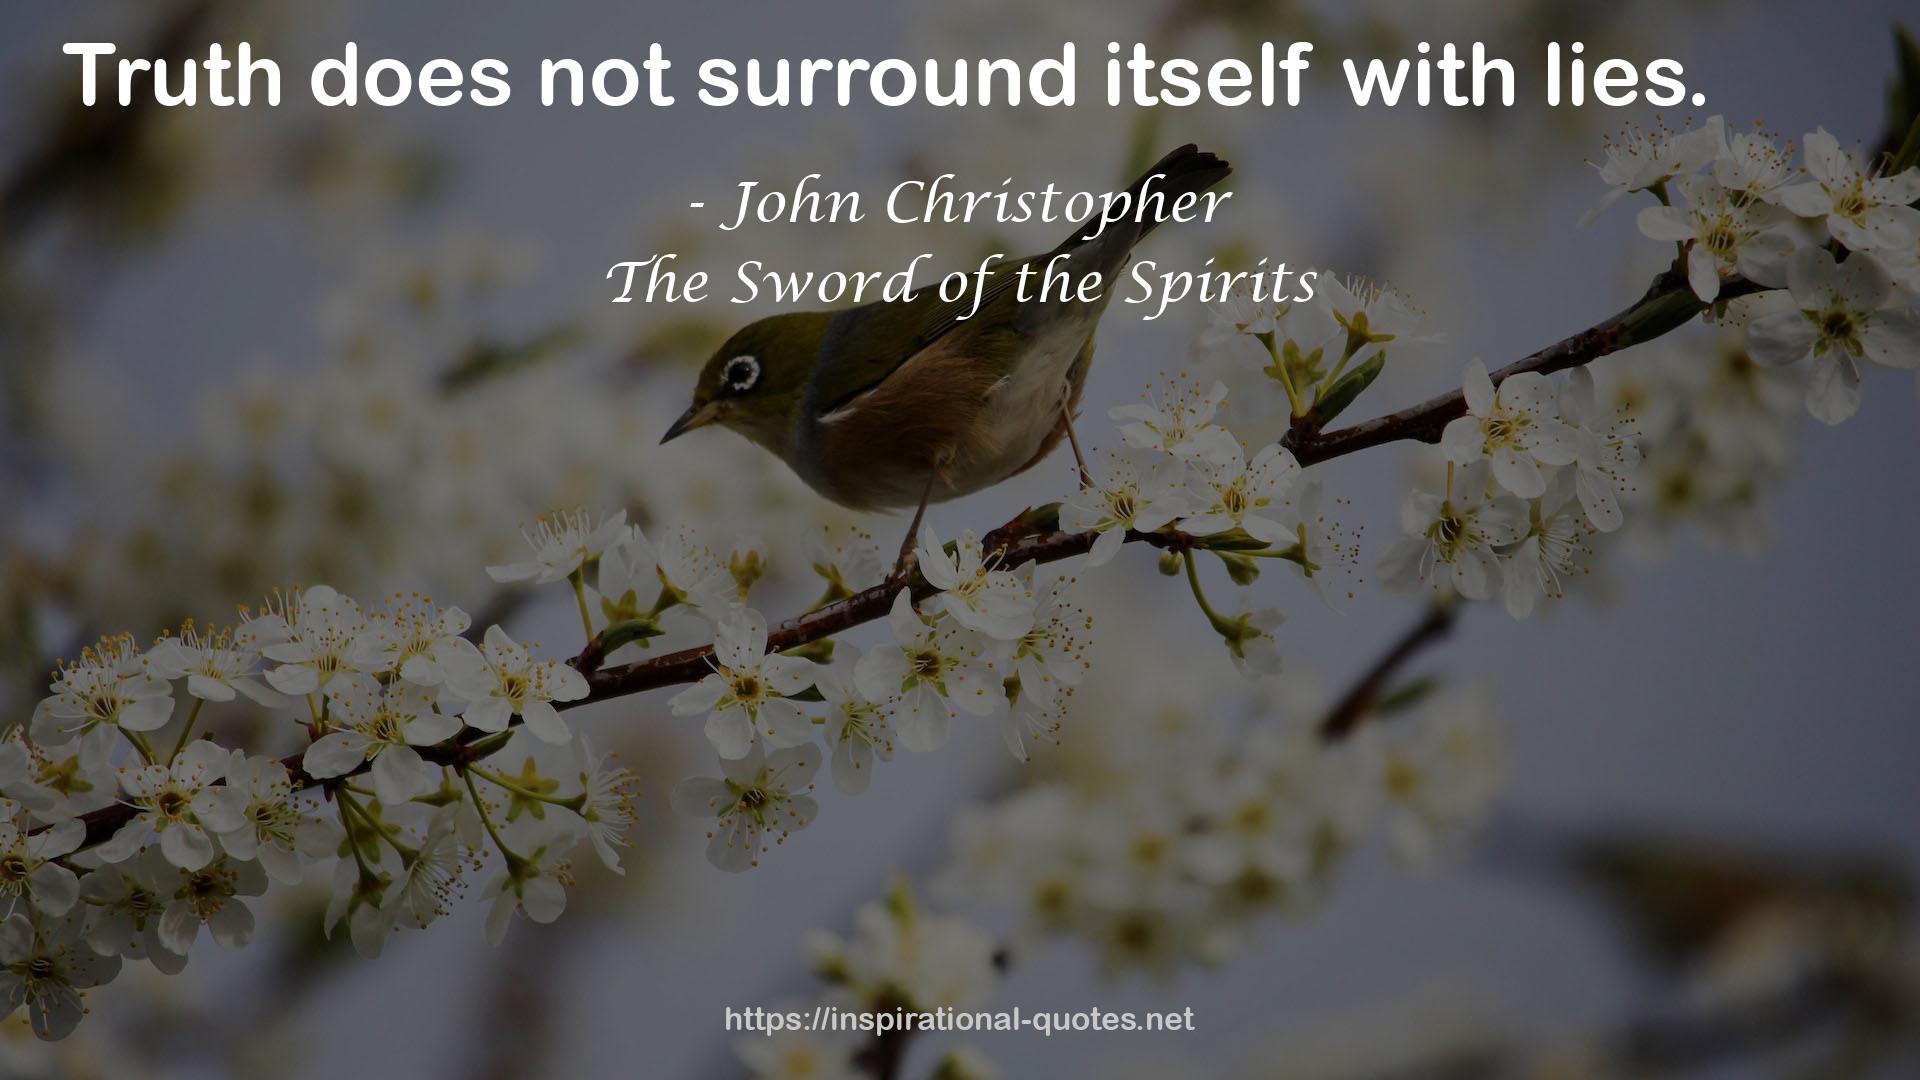 John Christopher QUOTES